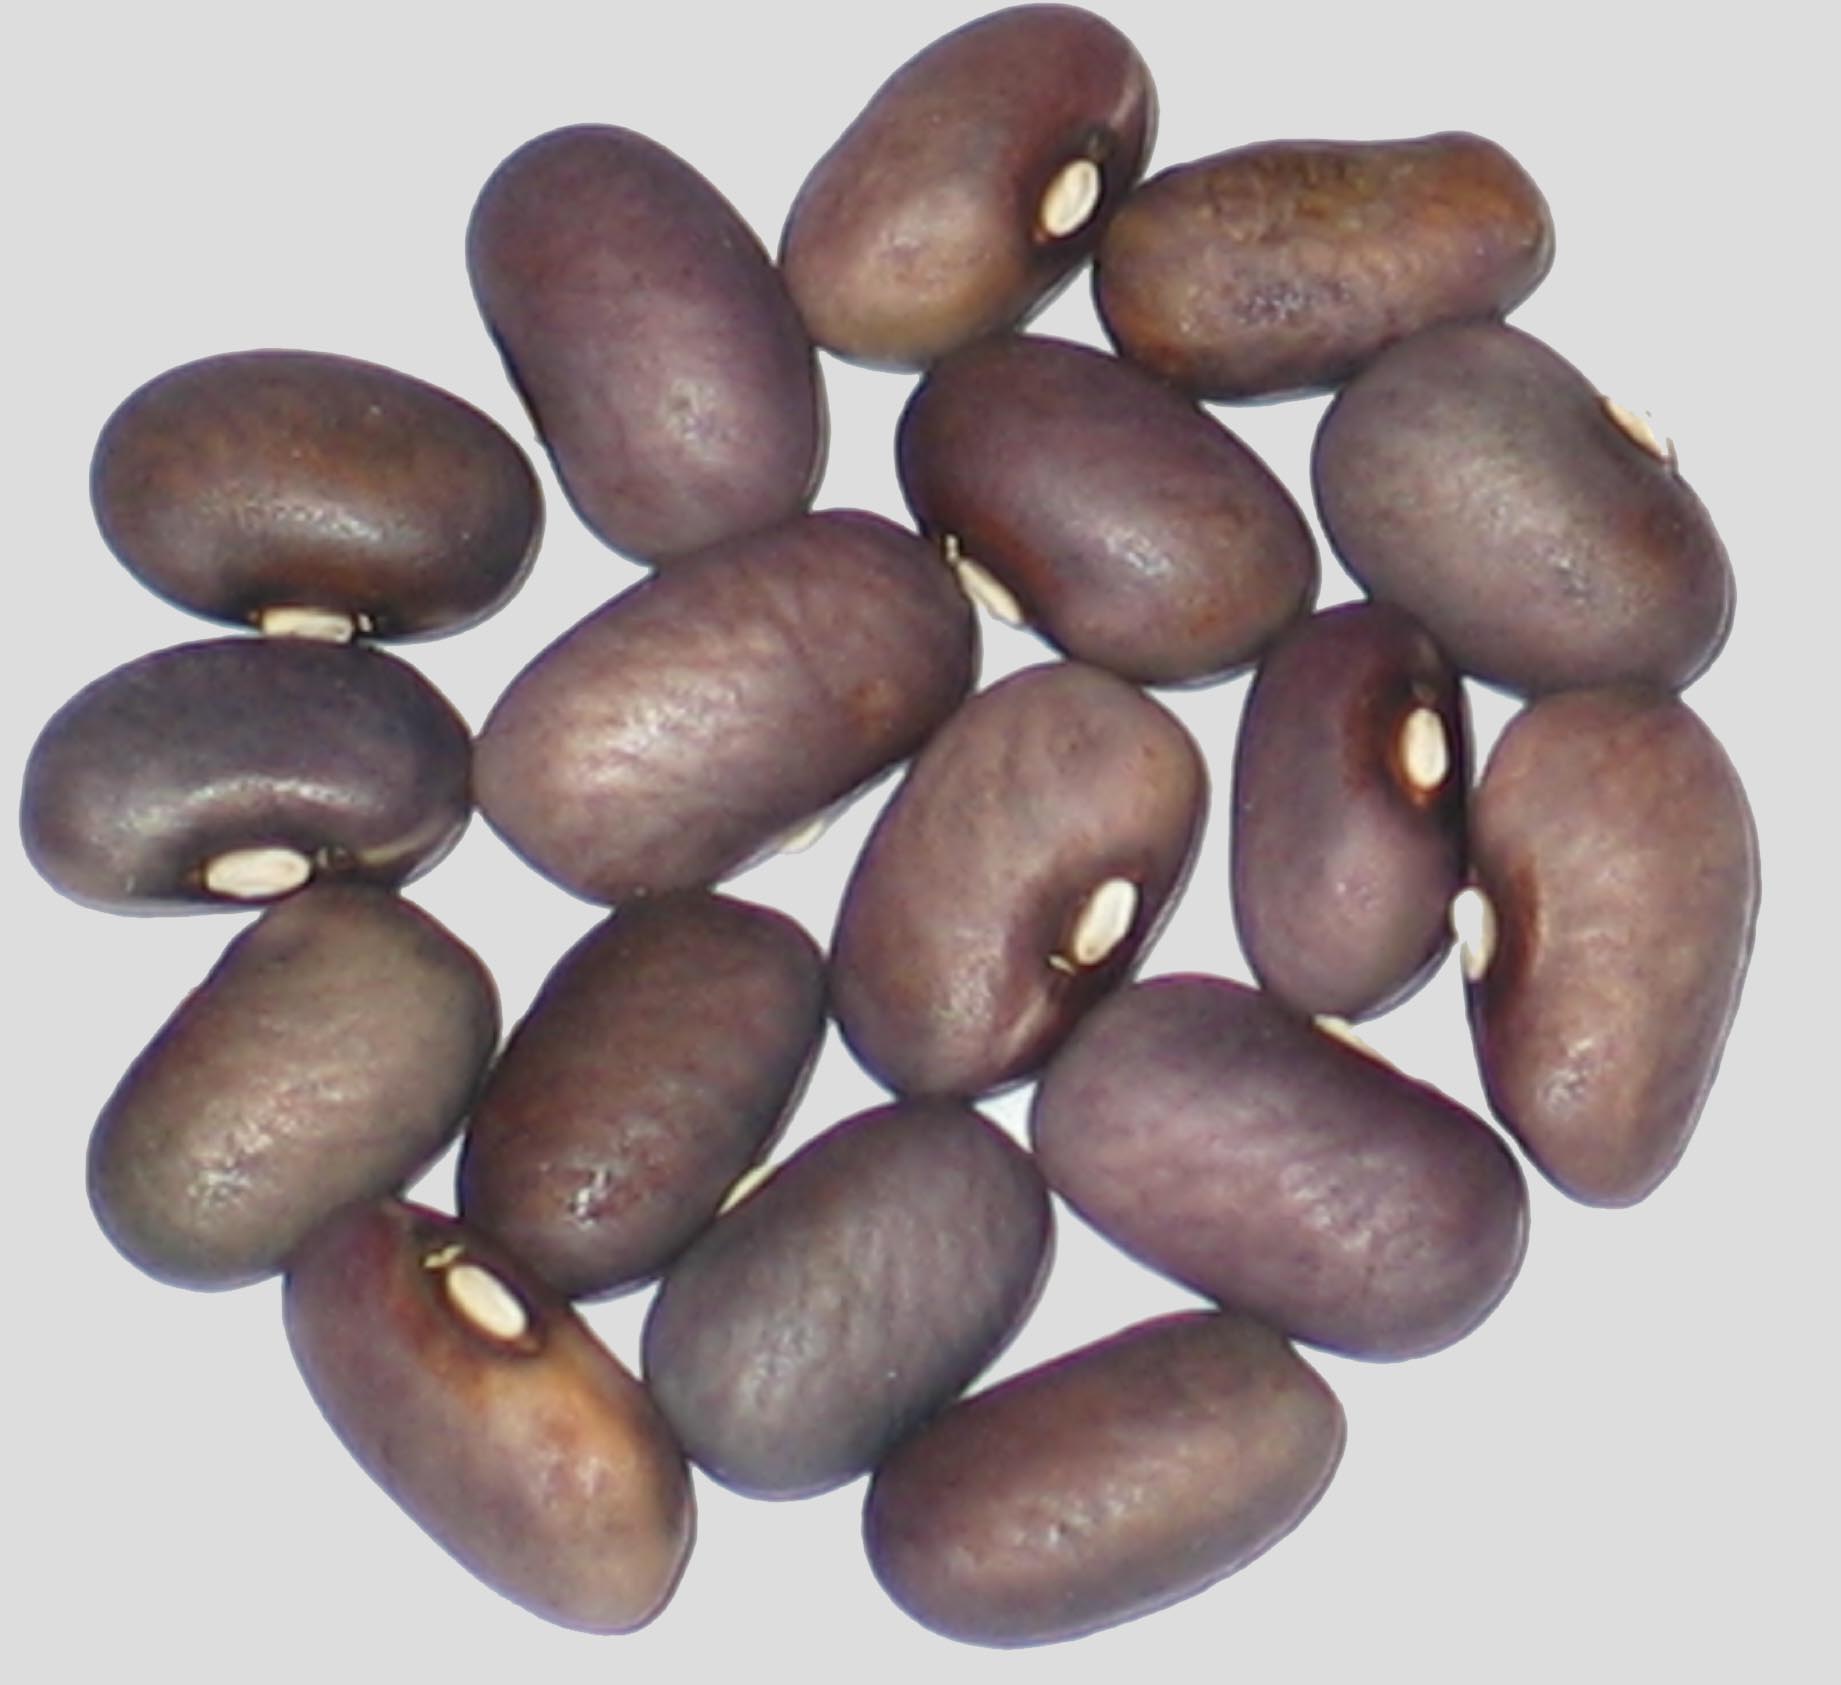 image of Tranquility beans